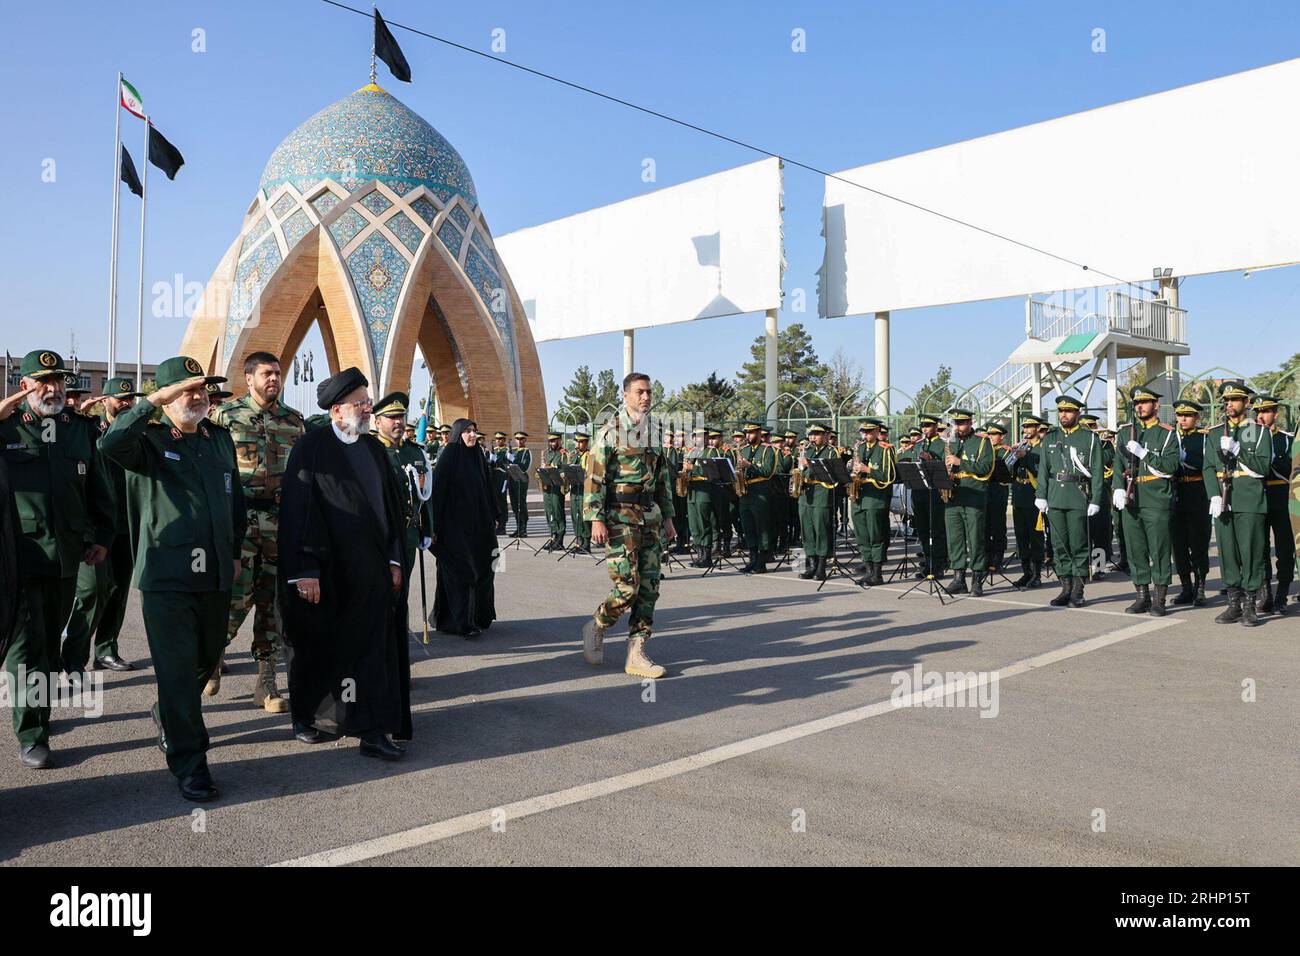 Tehran, Iran. 18th Aug, 2023. Iranian president EBRAHIM RAISI (4L) and IRGC commander-in-chief HOSSEIN SALAMI (2L) attend during a meeting with high-ranking commanders and members of Iran's Islamic Revolution Guards Corps (IRGC). The Islamic Revolutionary Guard Corps, also called Sepah or Pasdaran, is a multi-service primary branch of the Iranian Armed Forces. It was officially established by Ruhollah Khomeini as a military branch in May 1979, in the aftermath of the Islamic Revolution. Whereas the Iranian Army protects the country's sovereignty in a traditional capacity, the IRGC's constitut Stock Photo